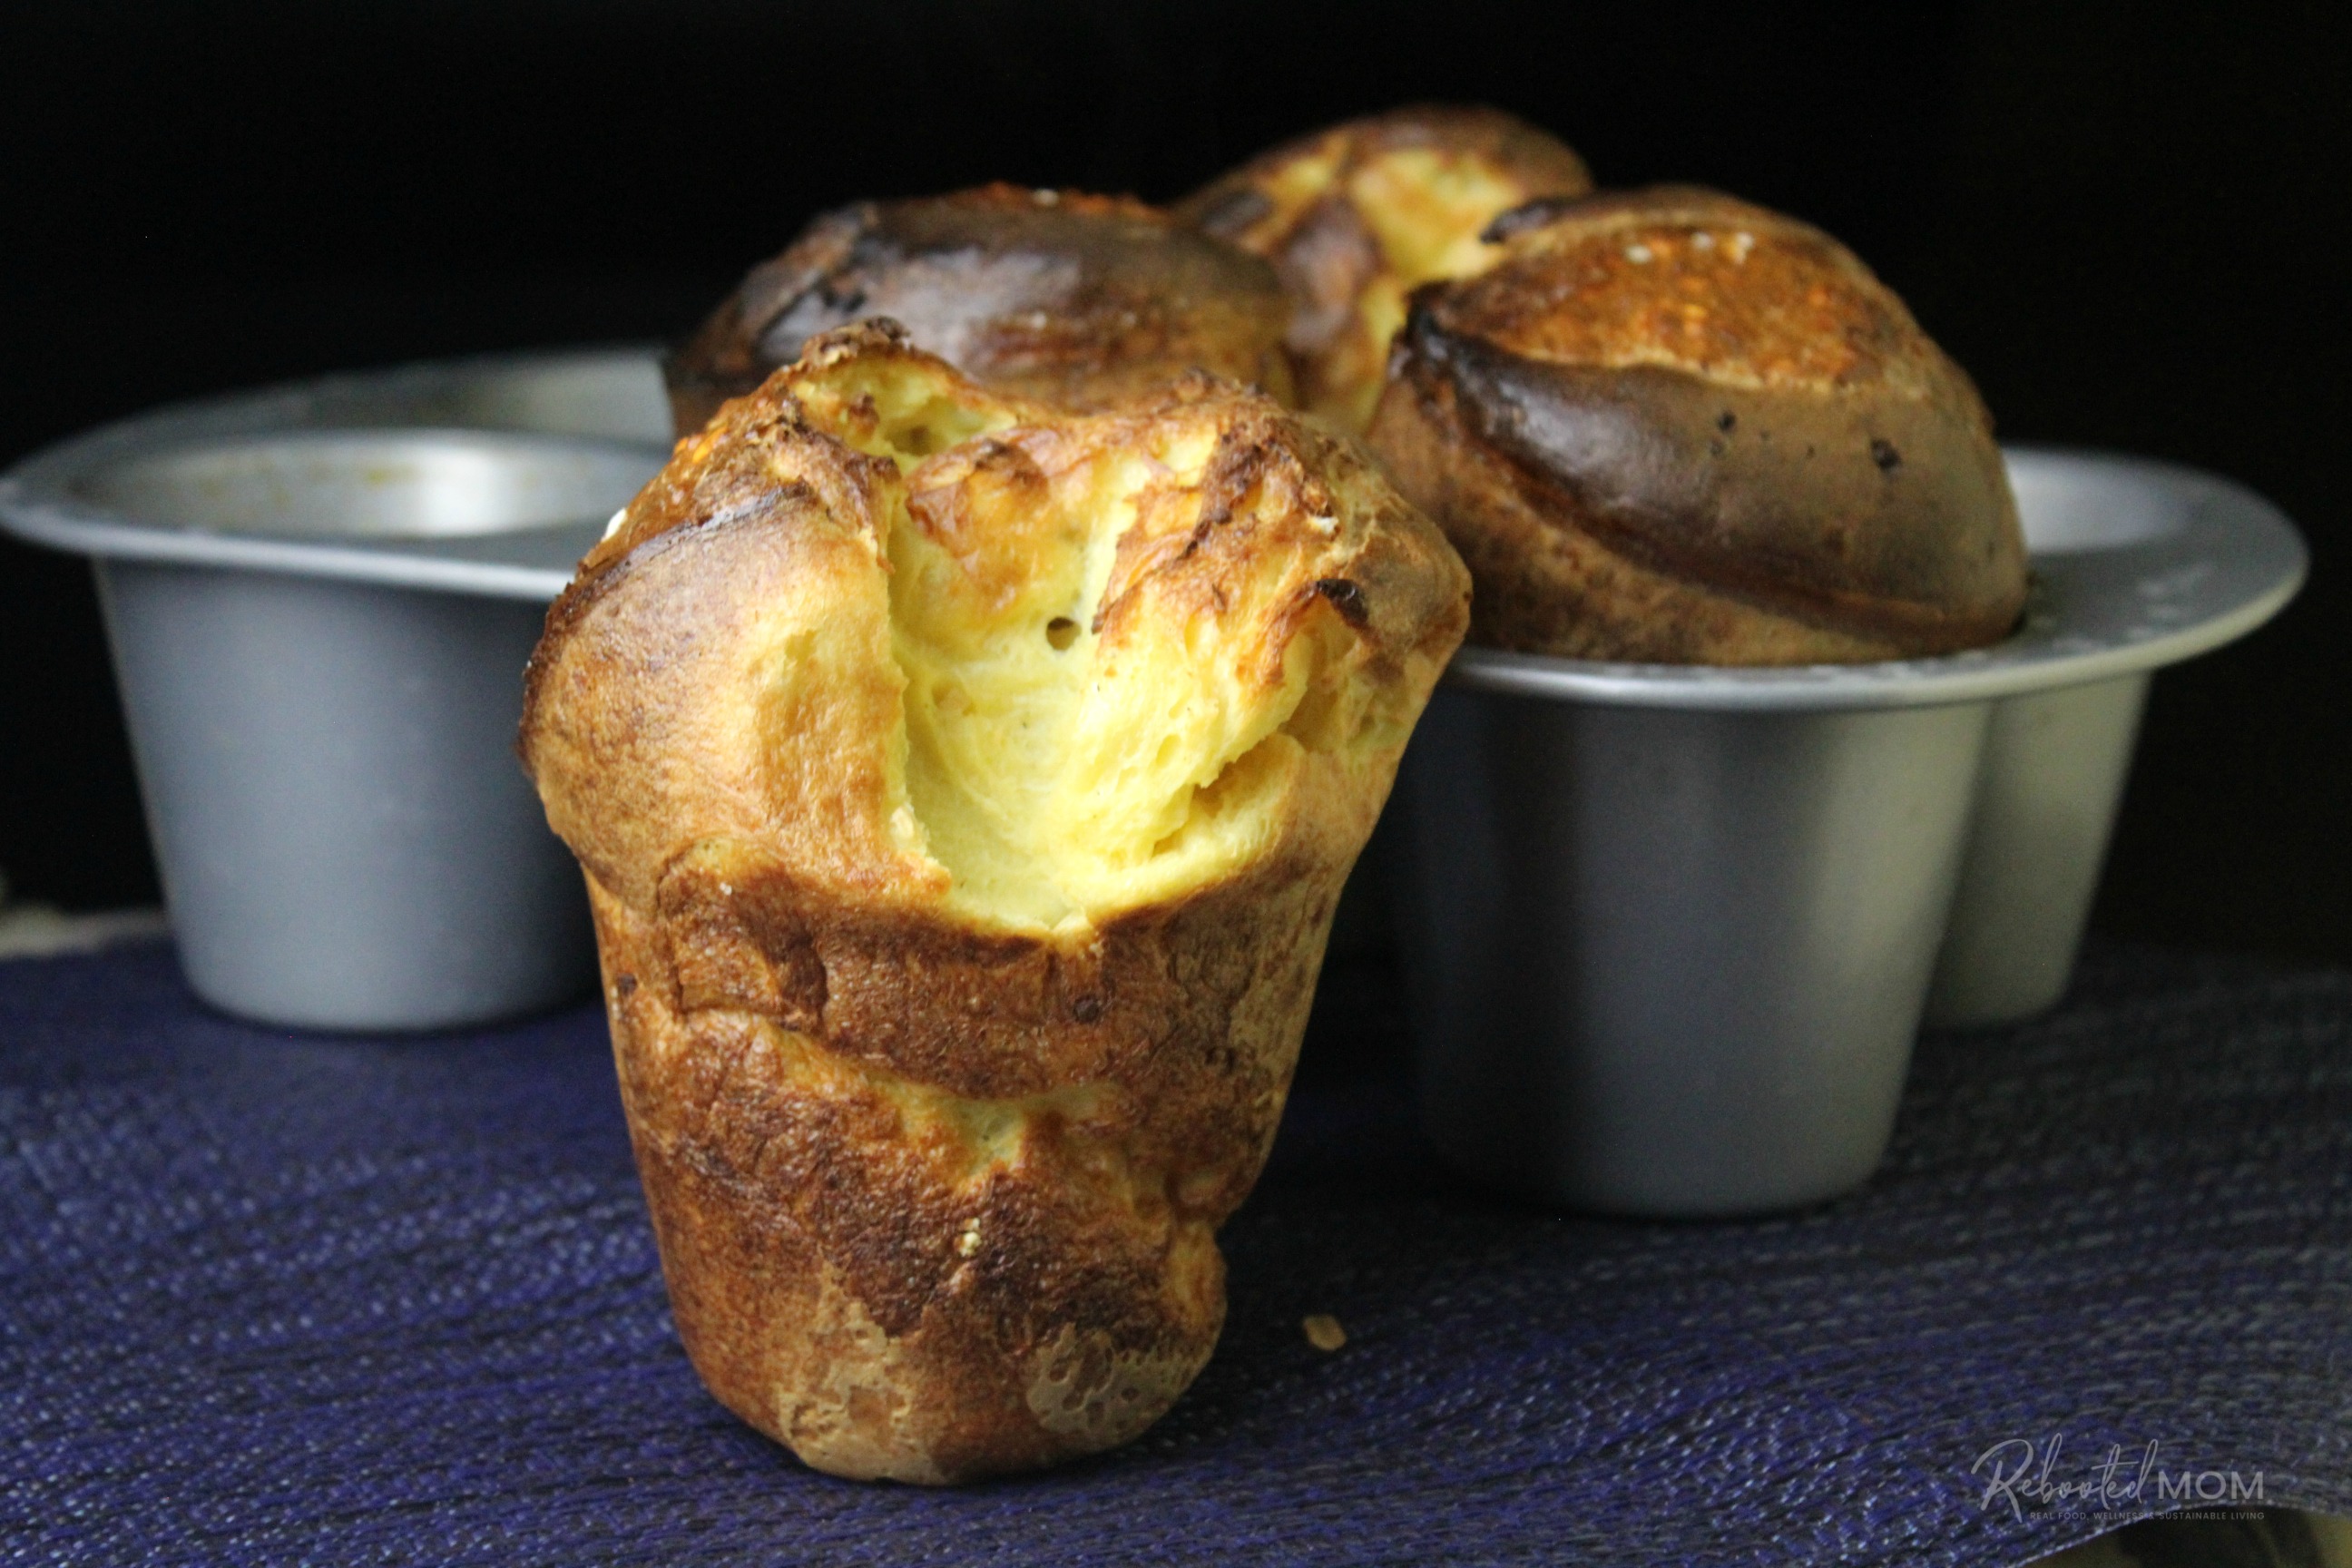 These delectable sourdough popovers are a great way to use up sourdough discard! They are delicious when eaten fresh from the oven!